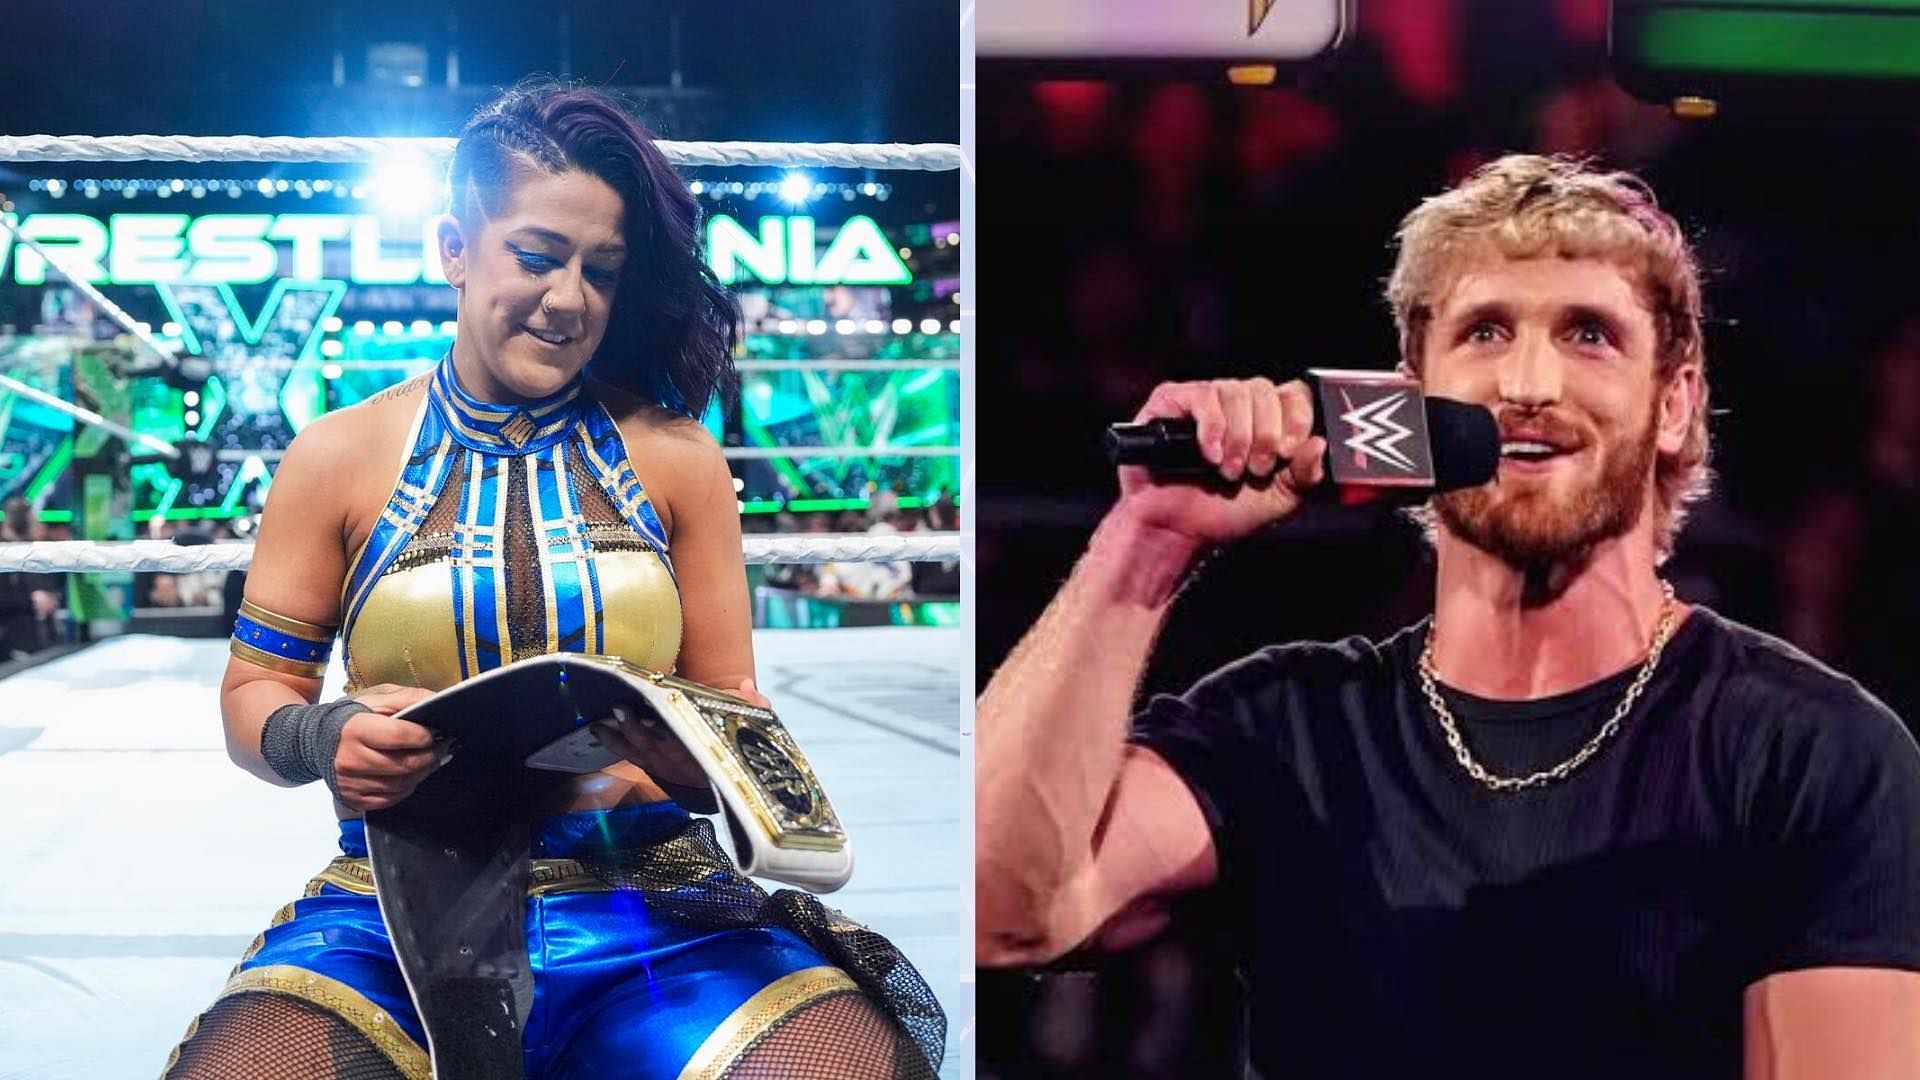 Bayley steals something from Logan Paul